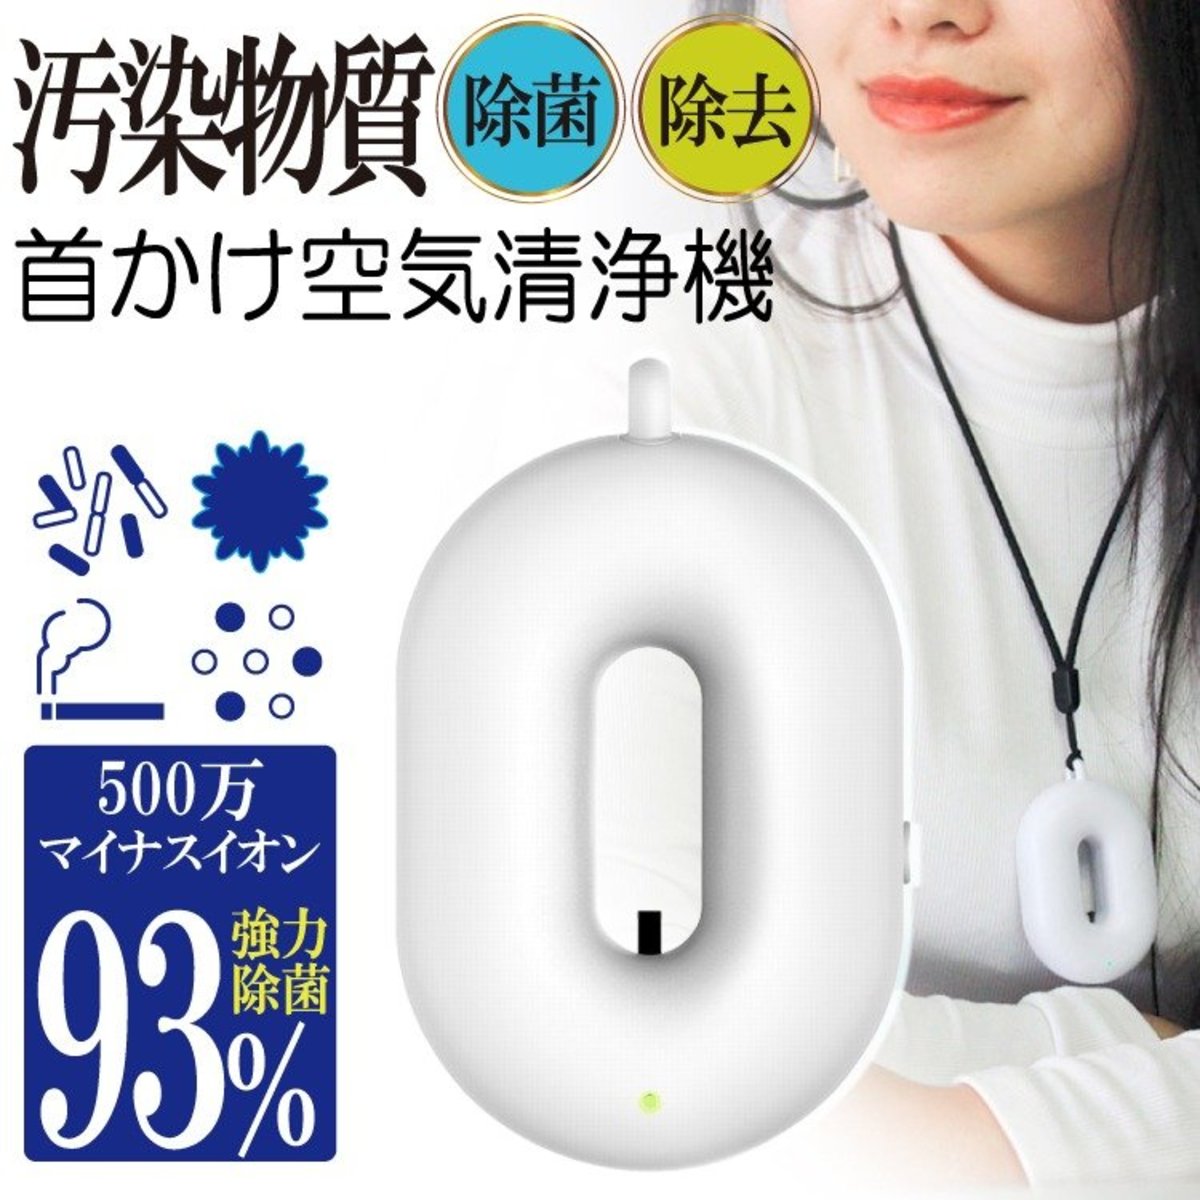 Souyi - SY-127 Japanese neck-mounted air purifier